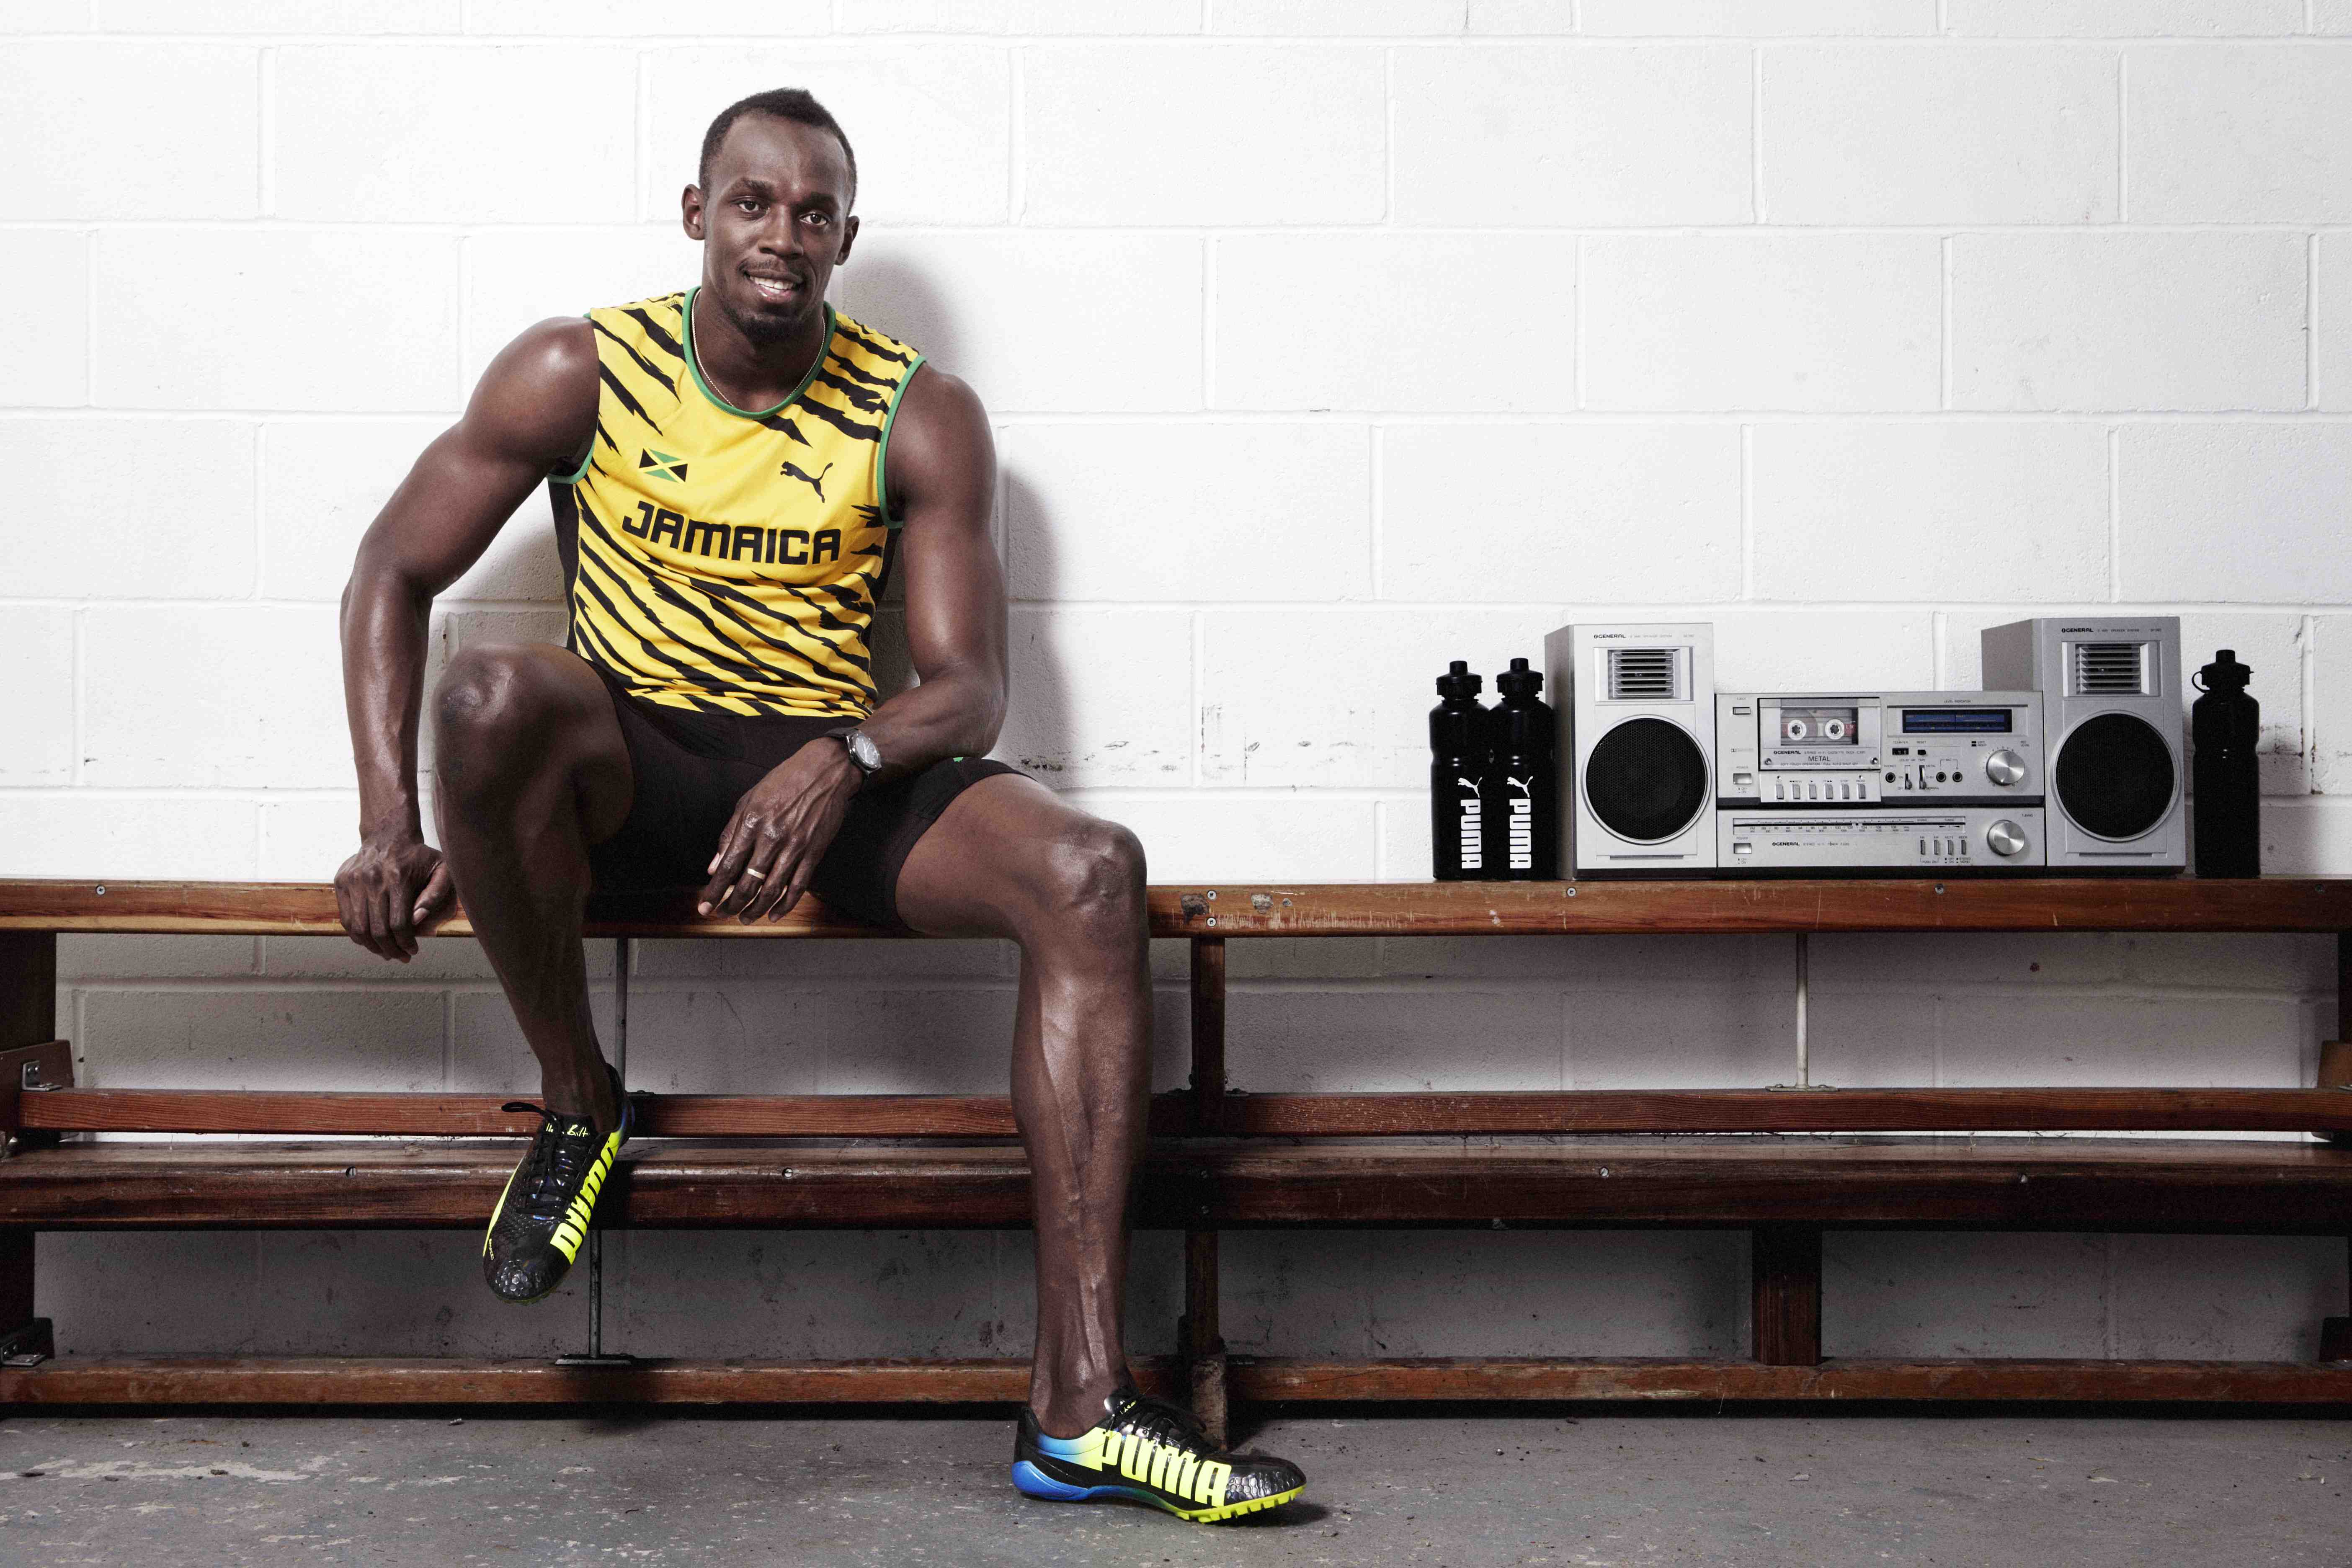 VIDEO: Usain Bolt works Russian skills in prep for Moscow - Canadian Running Magazine